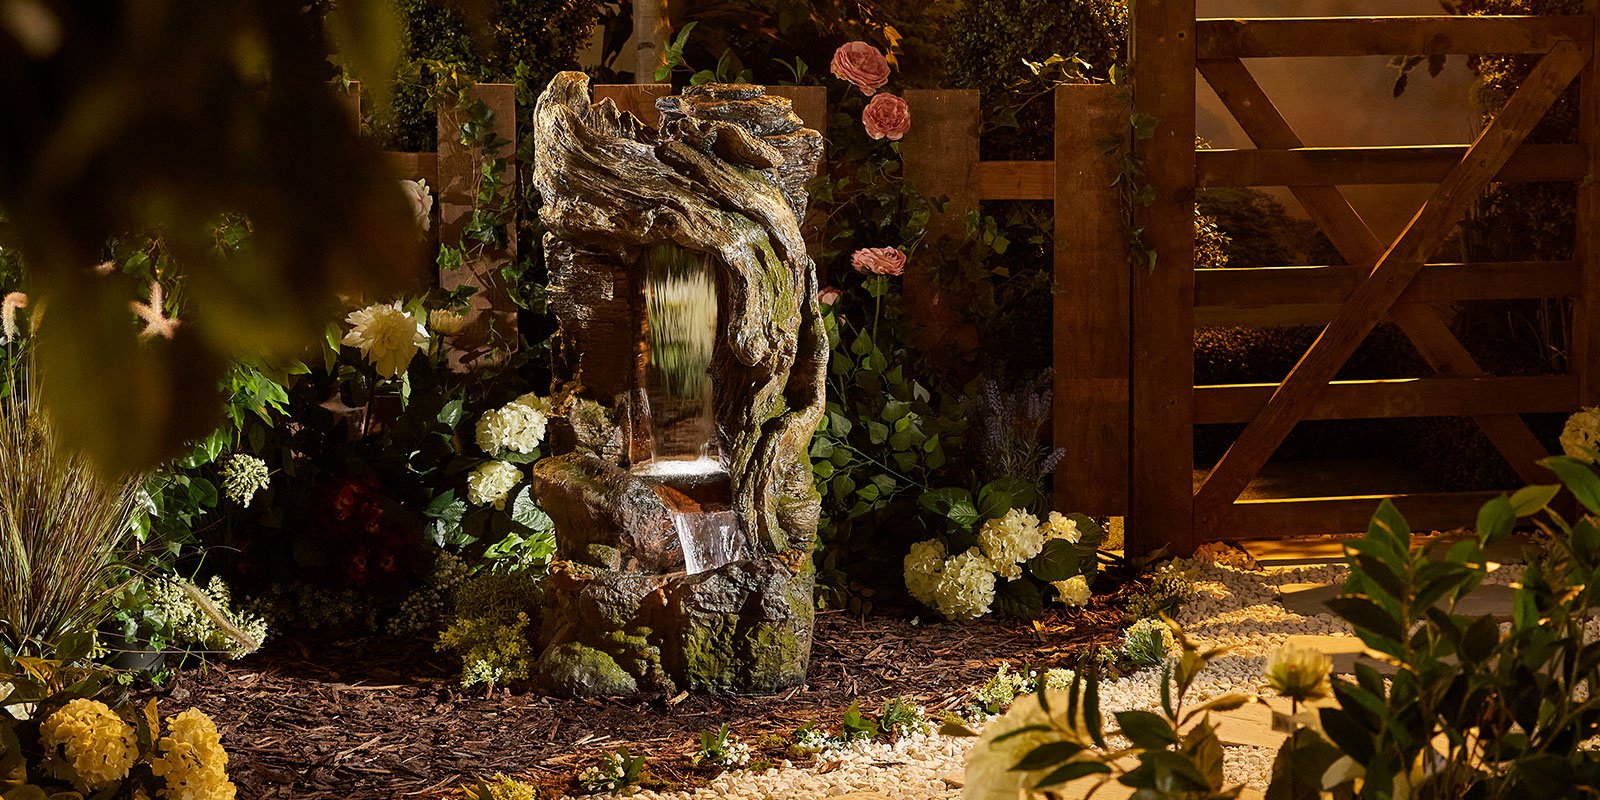 How To Choose an Outdoor Water Fountain